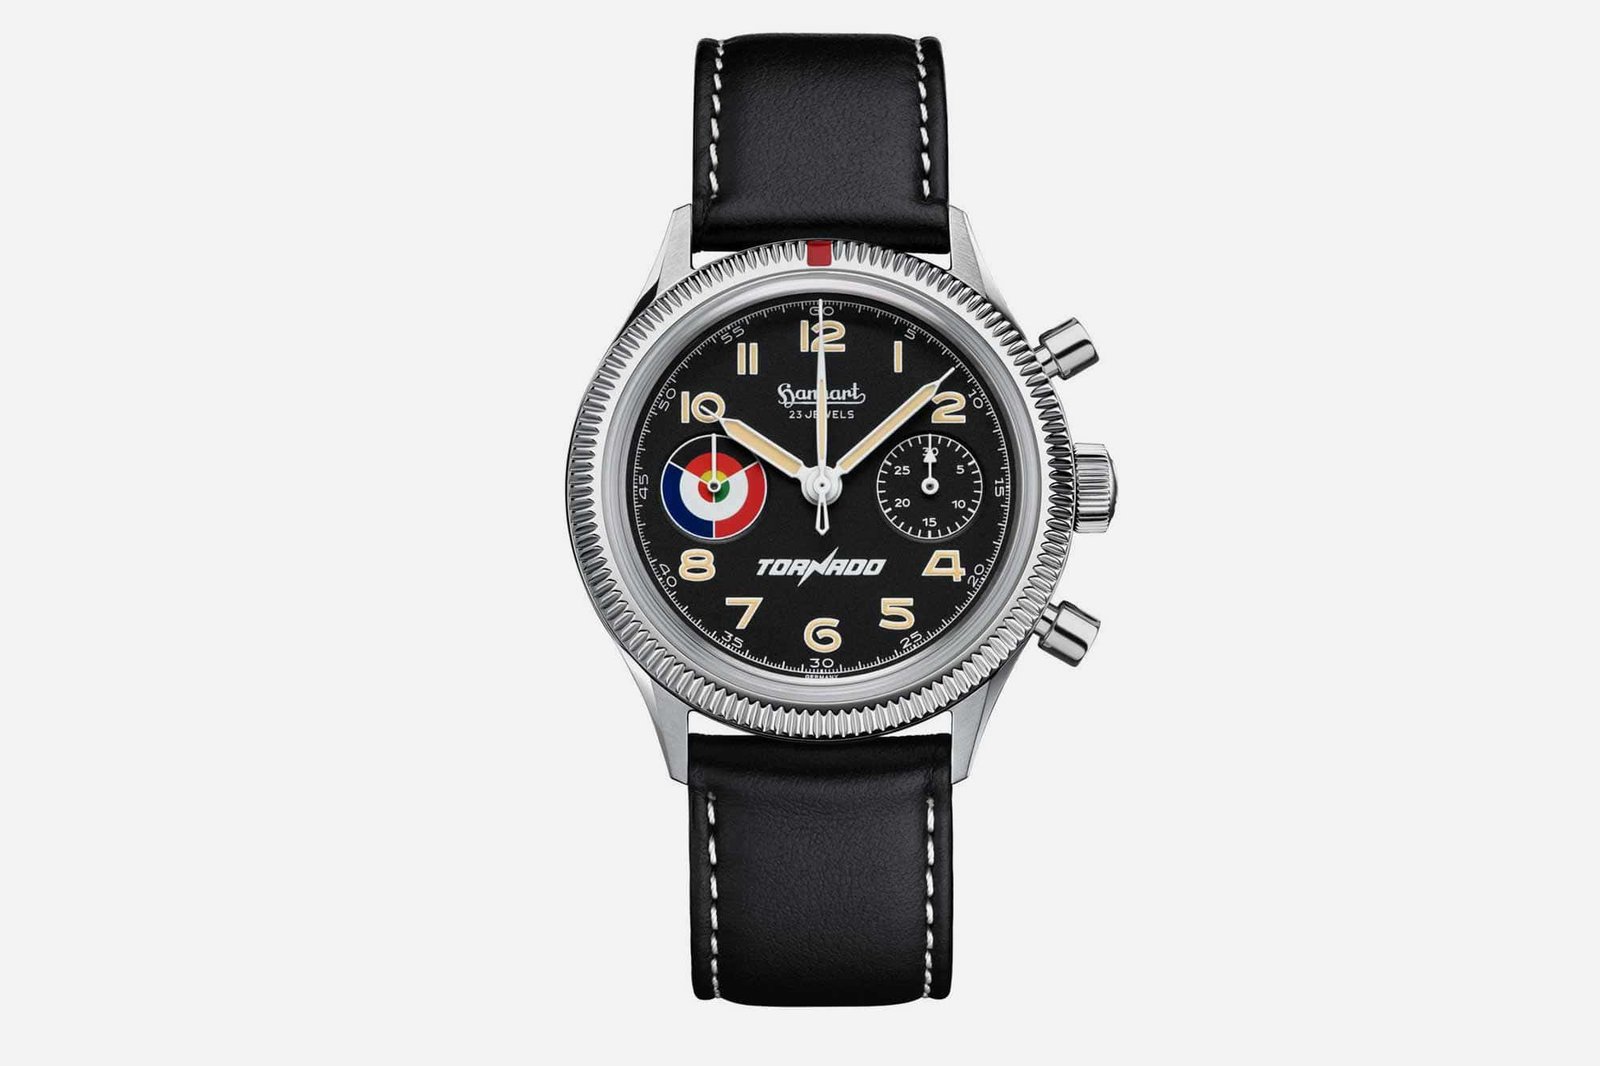 Hanhart Marks an Important Aviation Anniversary with their Latest Release